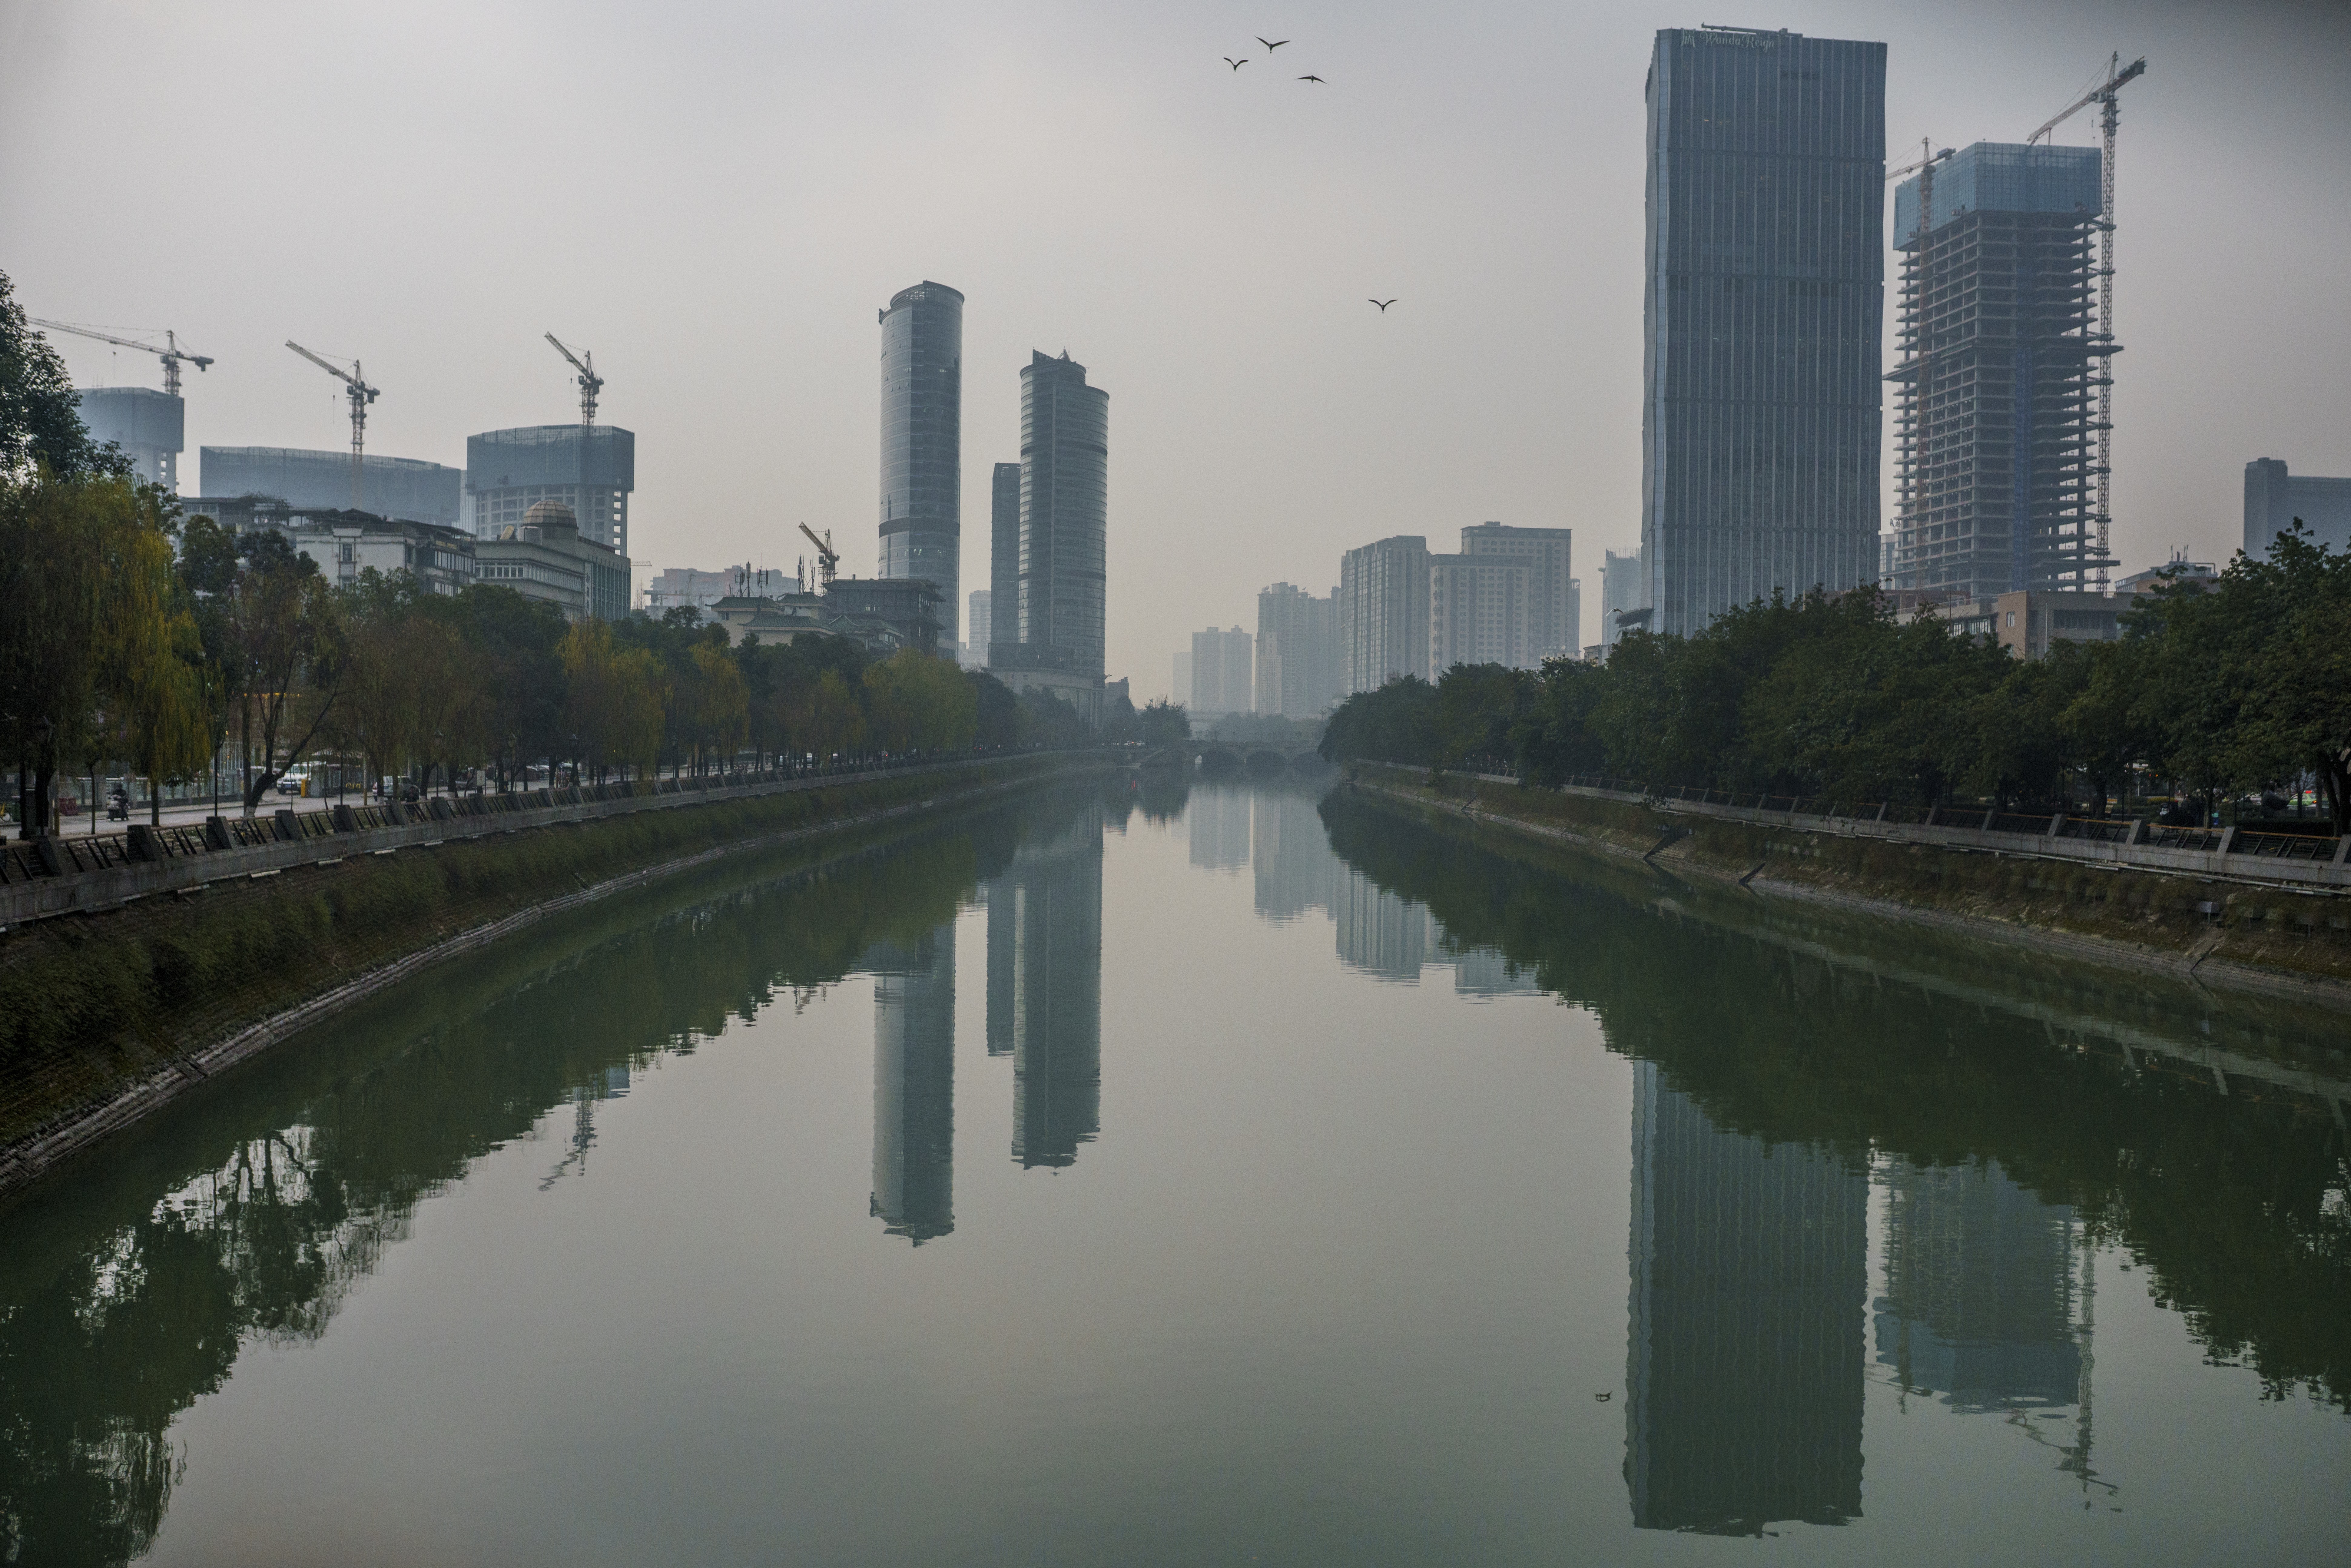 Major Chinese property developers have been focusing on acquiring land in China’s non first-tier cites, such as Chengdu, since 2017. Photo: Paul Ratje